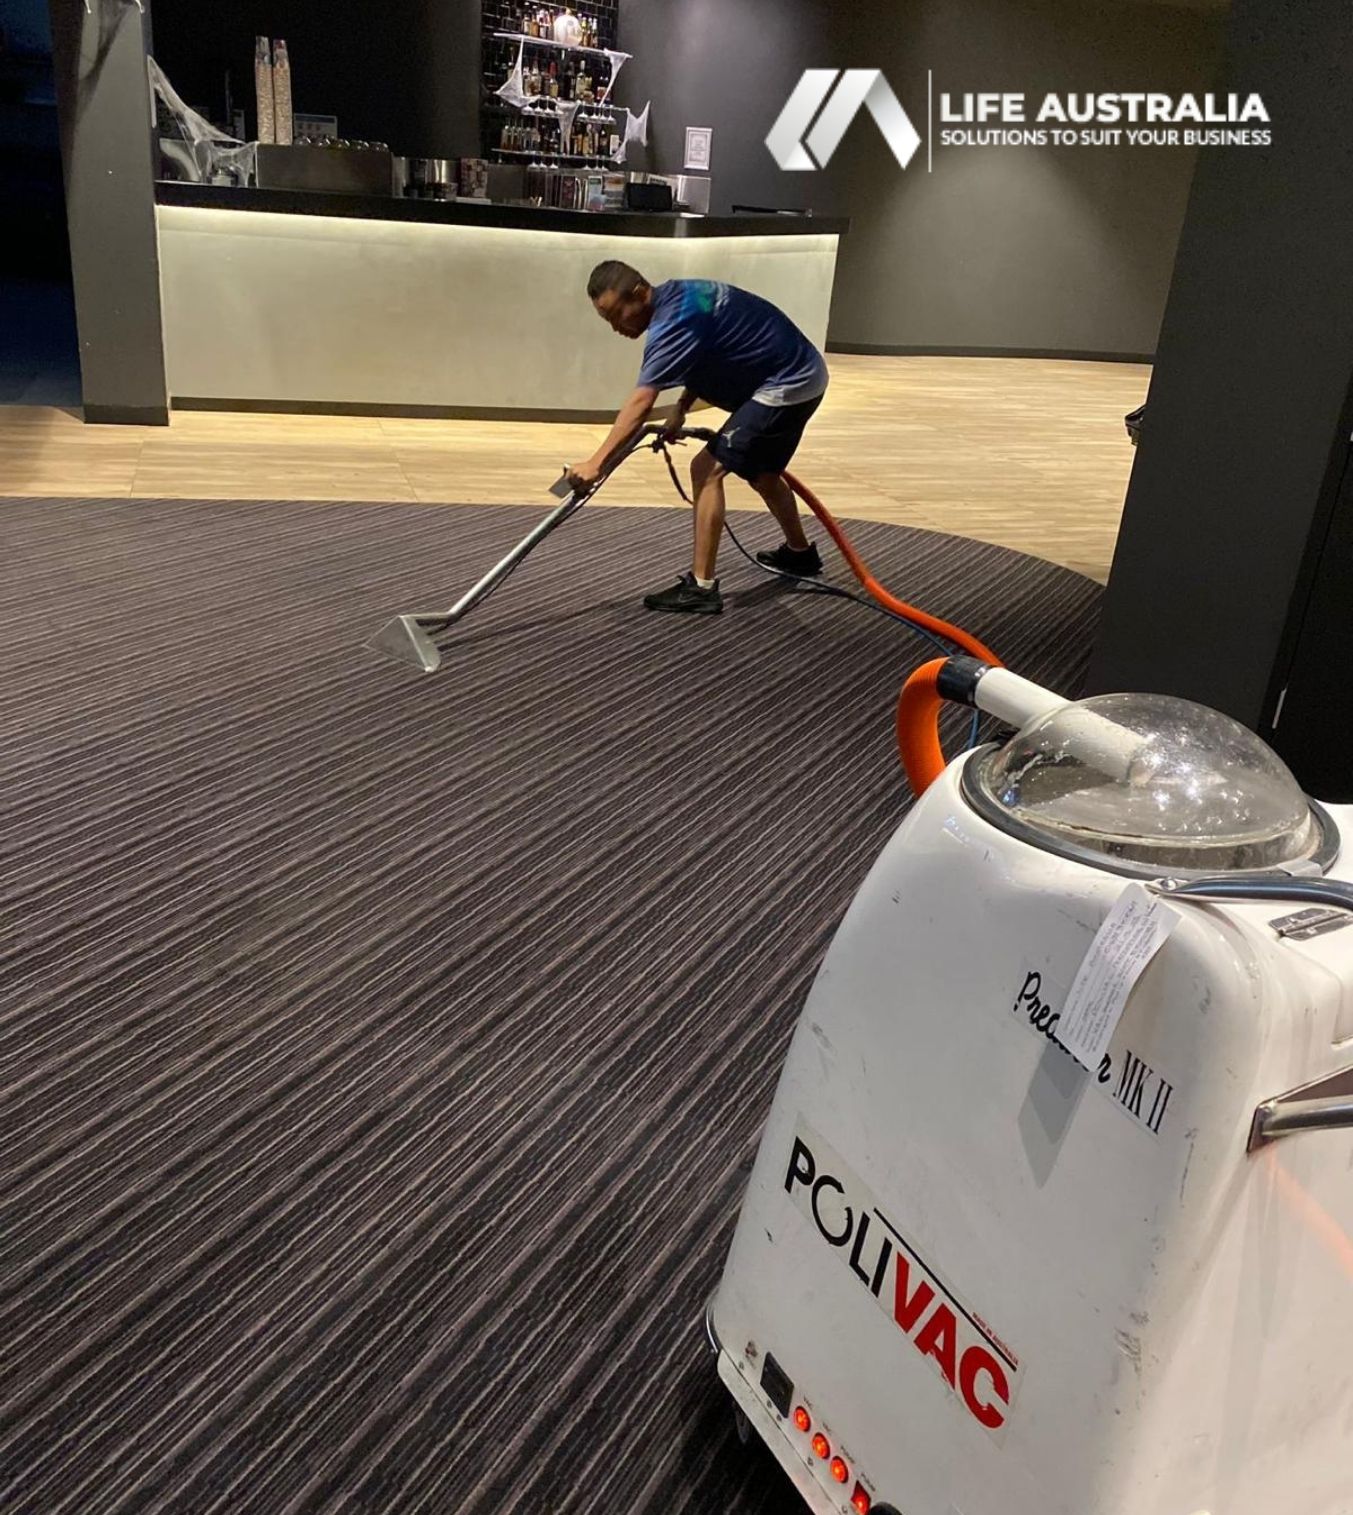 Carpet Steam Cleaning